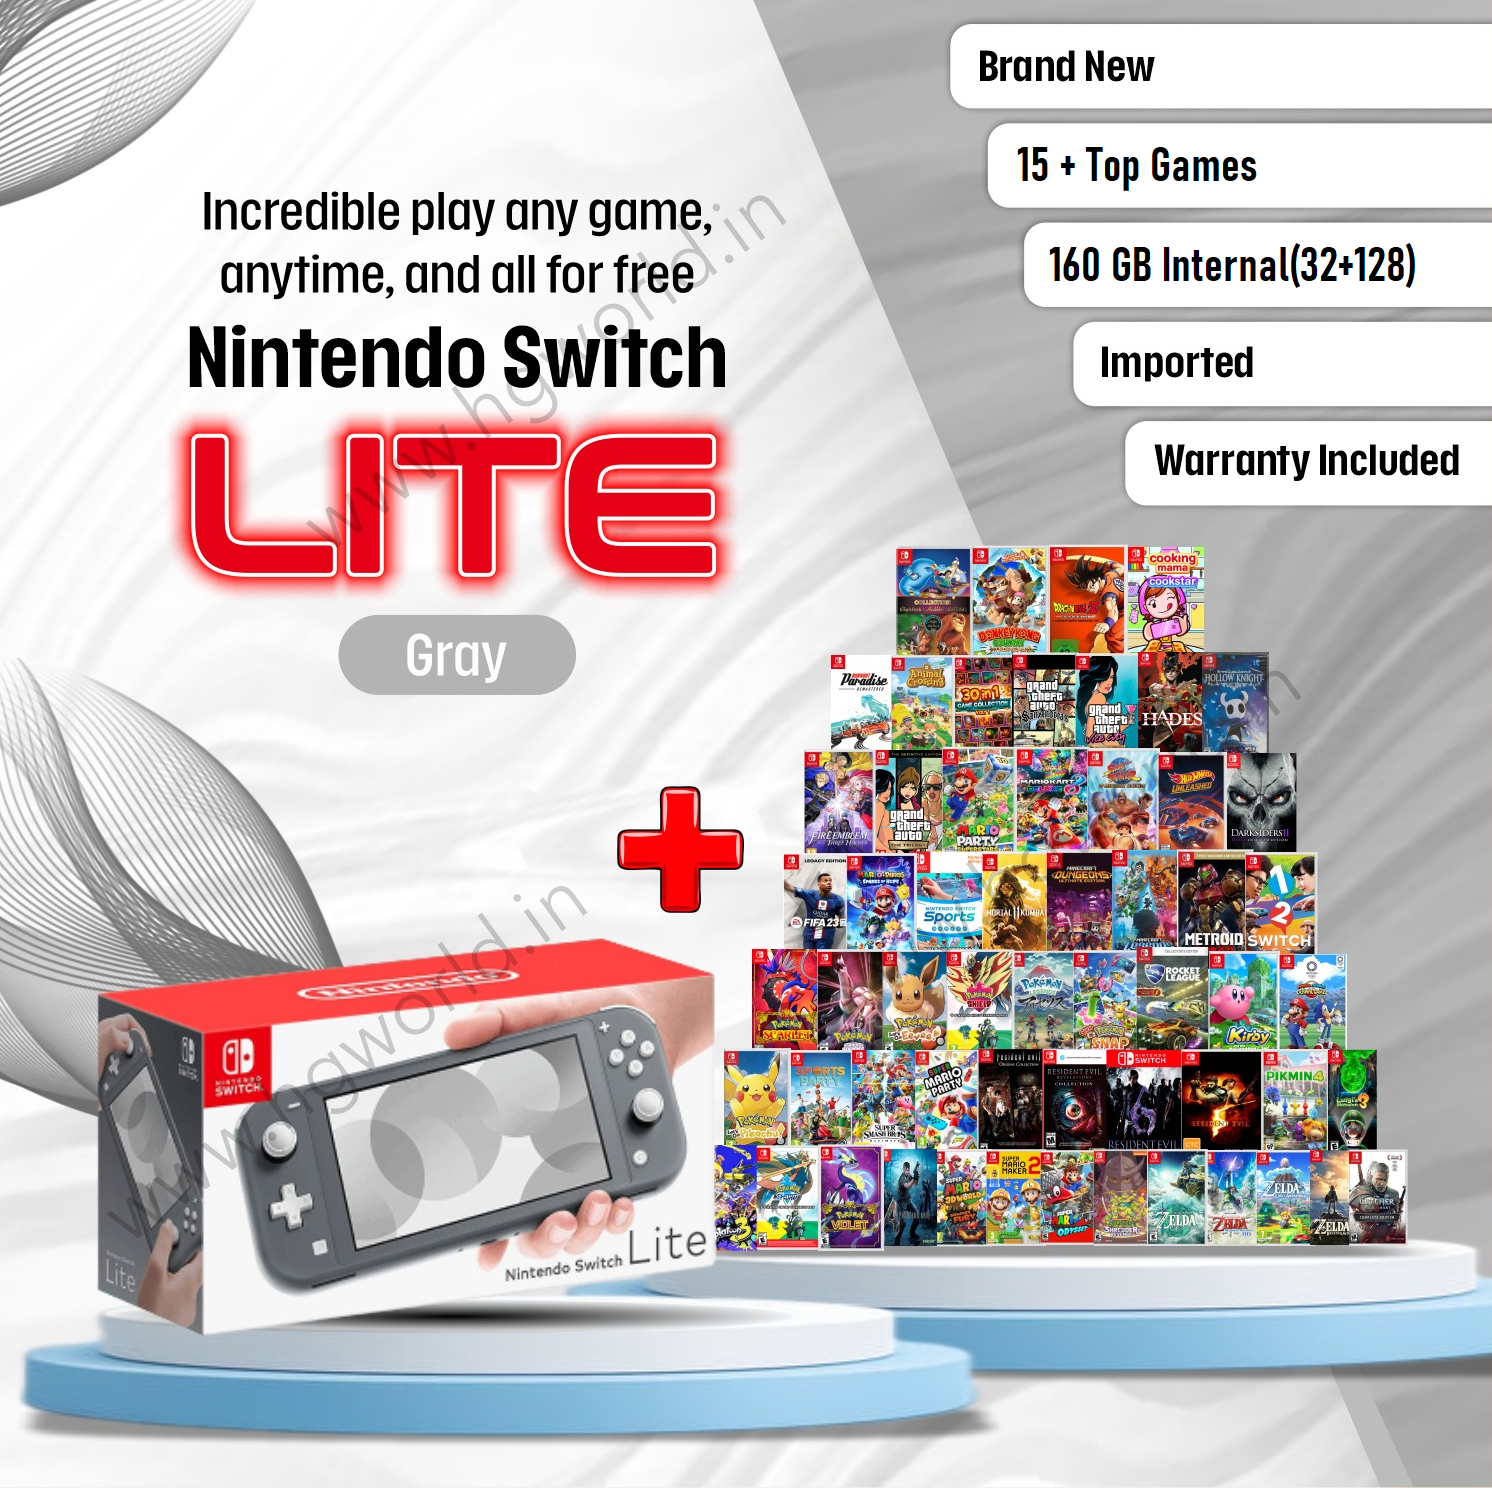 Brand New NINTENDO Switch Lite | 15+ Best Games Bundle | 160 GB  Internal(32+128) | Gray Edition | Handheld Portable Gaming Console | All  Standard 